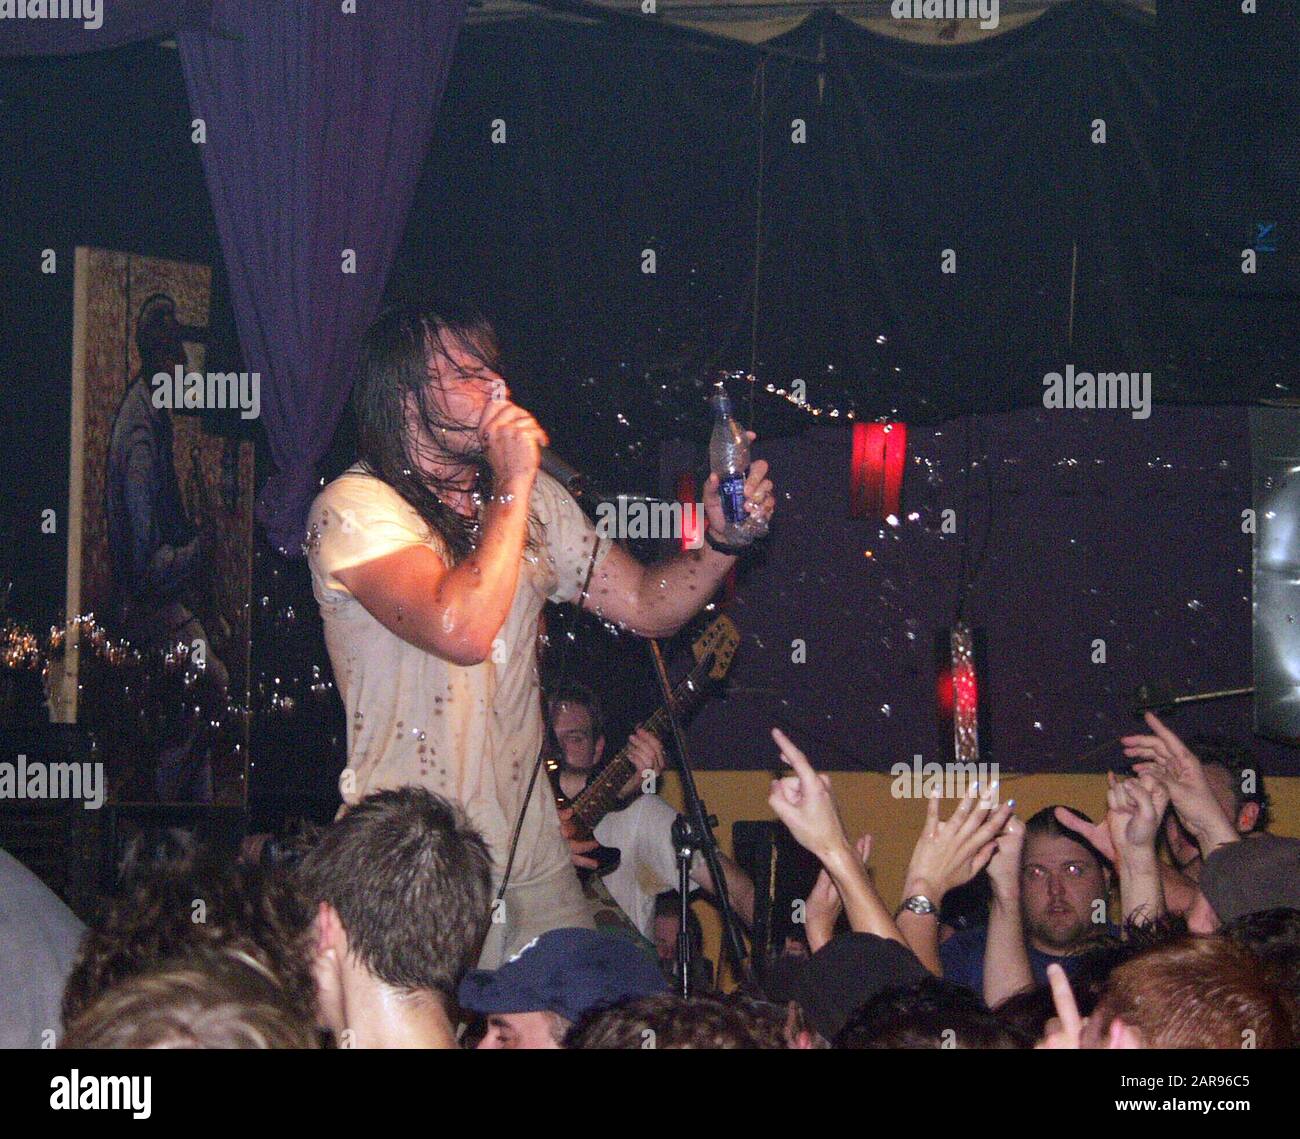 SEPTEMBER 11: Andrew WK squirts water on the crowd during his performance at the 40 Watt Club in Athens, Georgia on September 11, 2002. CREDIT: Chris McKay / MediaPunch Stock Photo